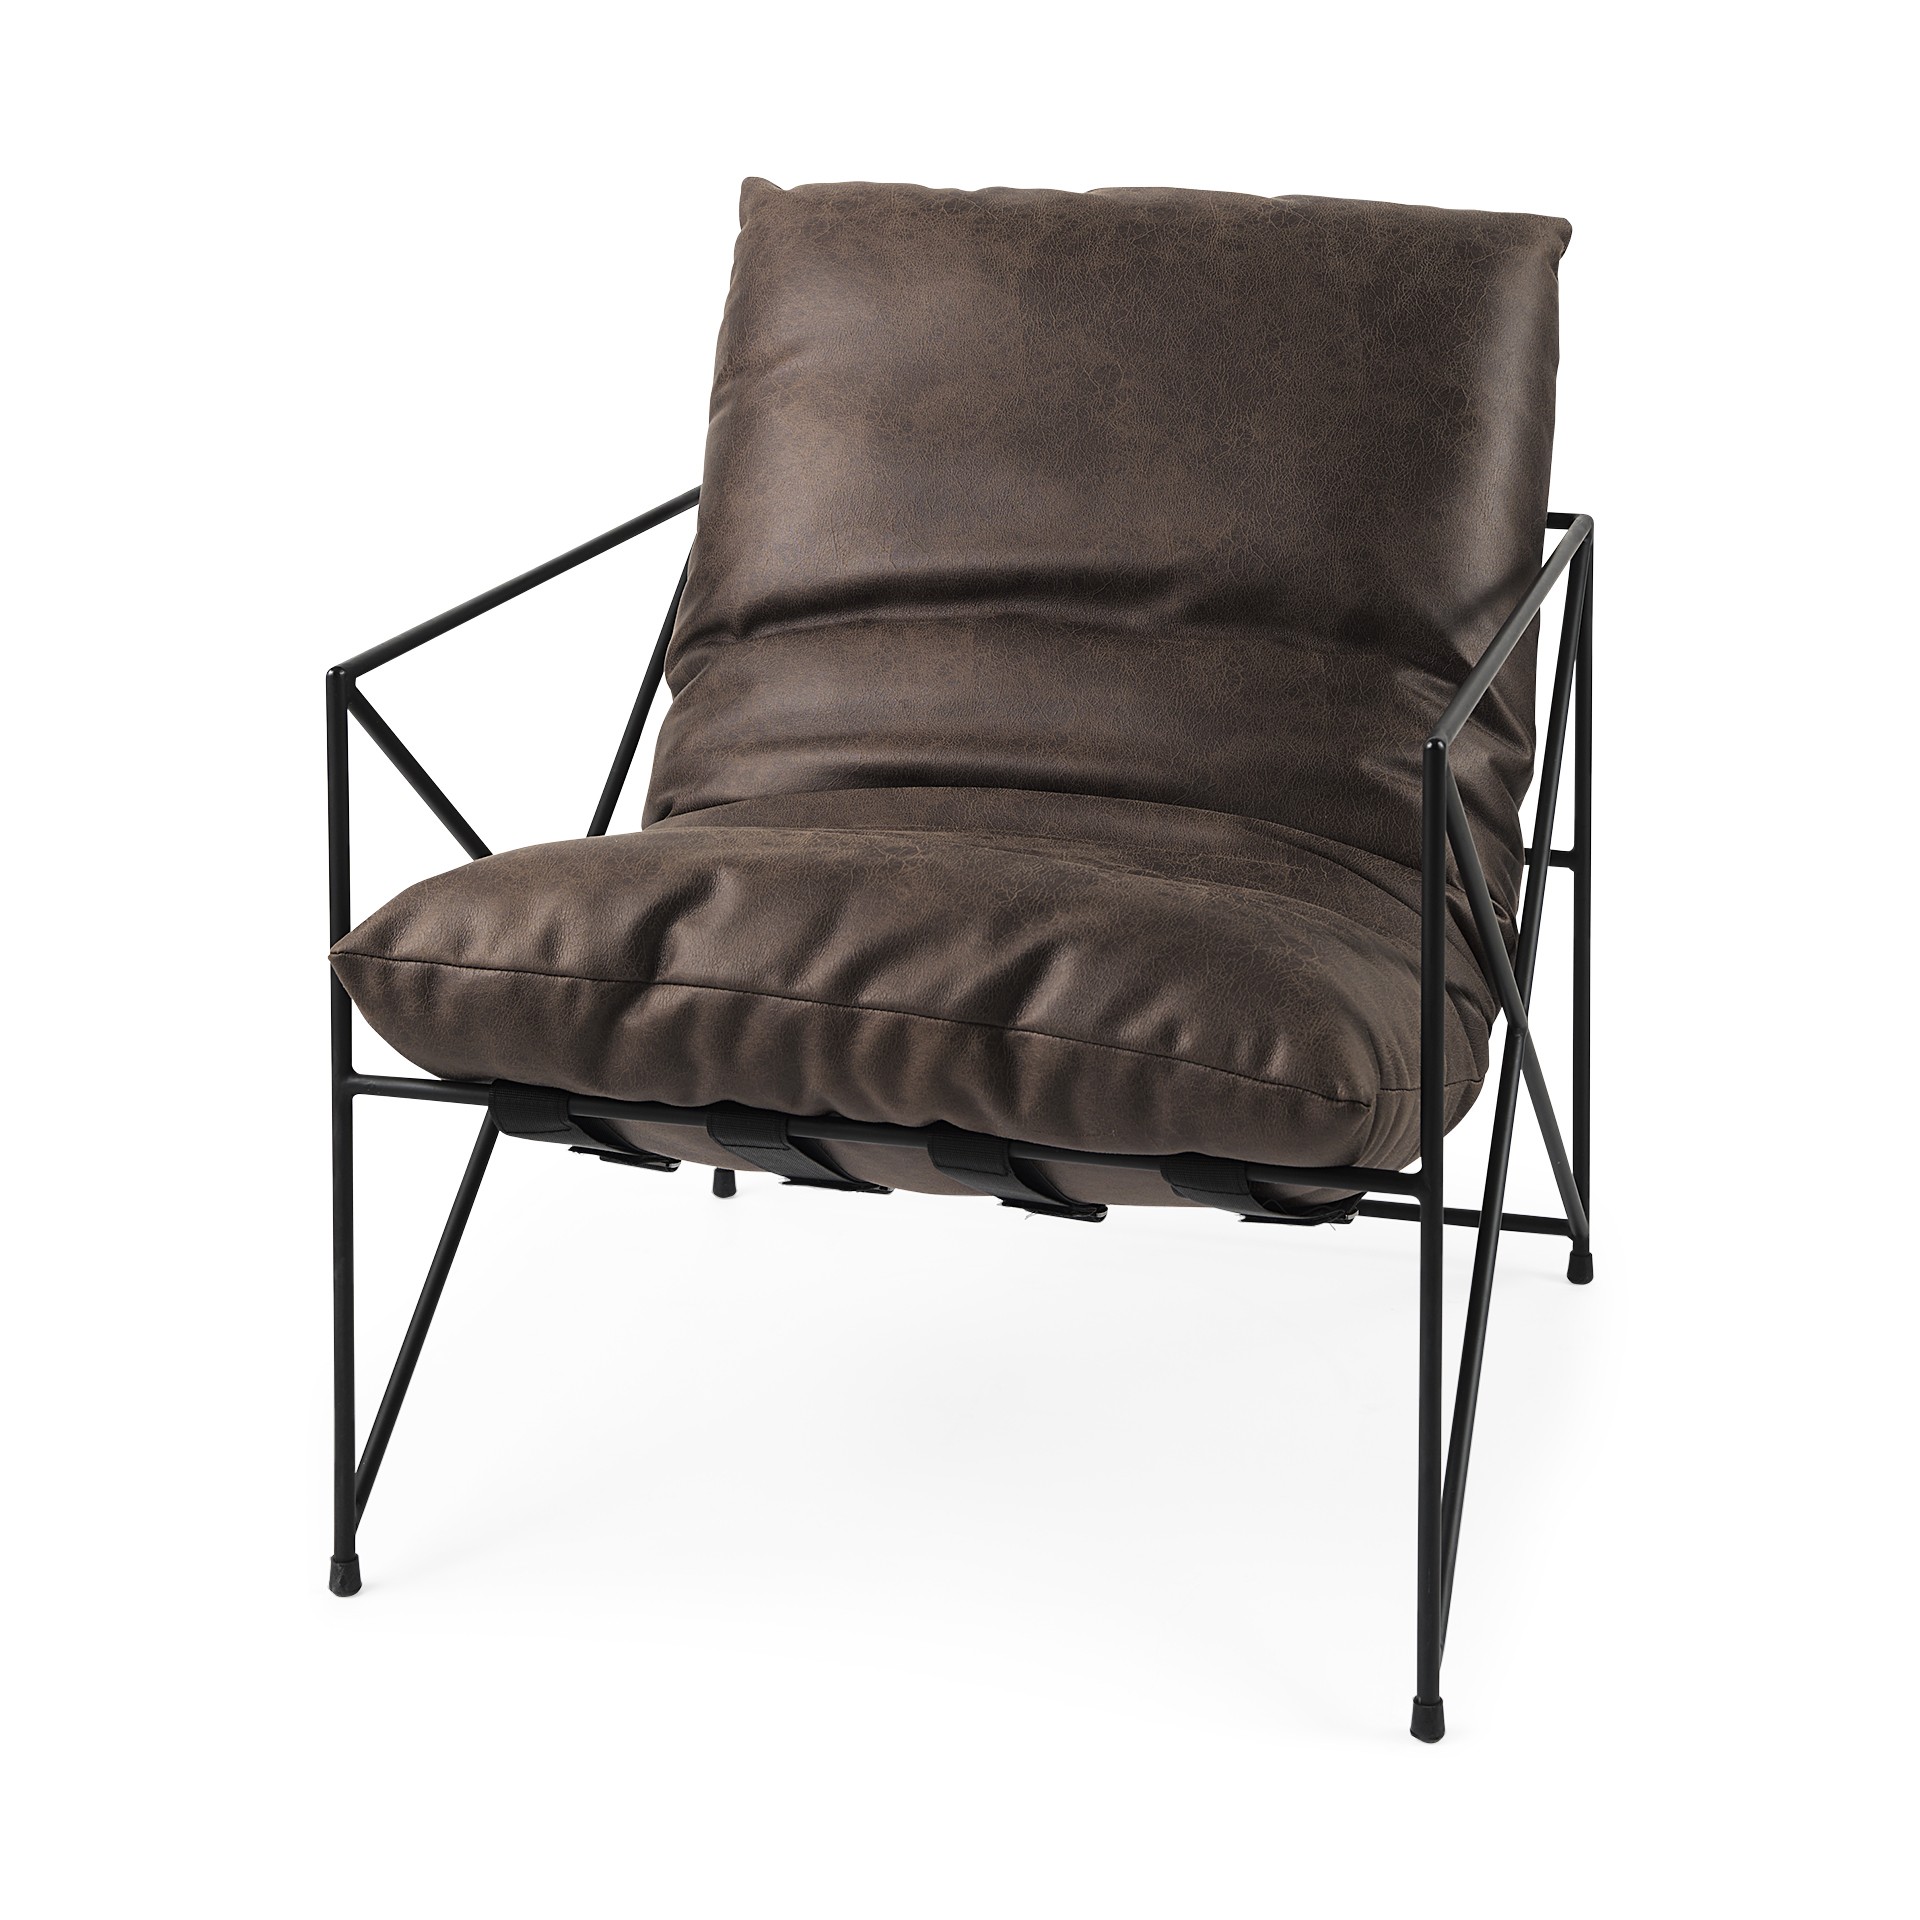 Dark Brown Faux Leather Contemporary Metal Chair-392014-1